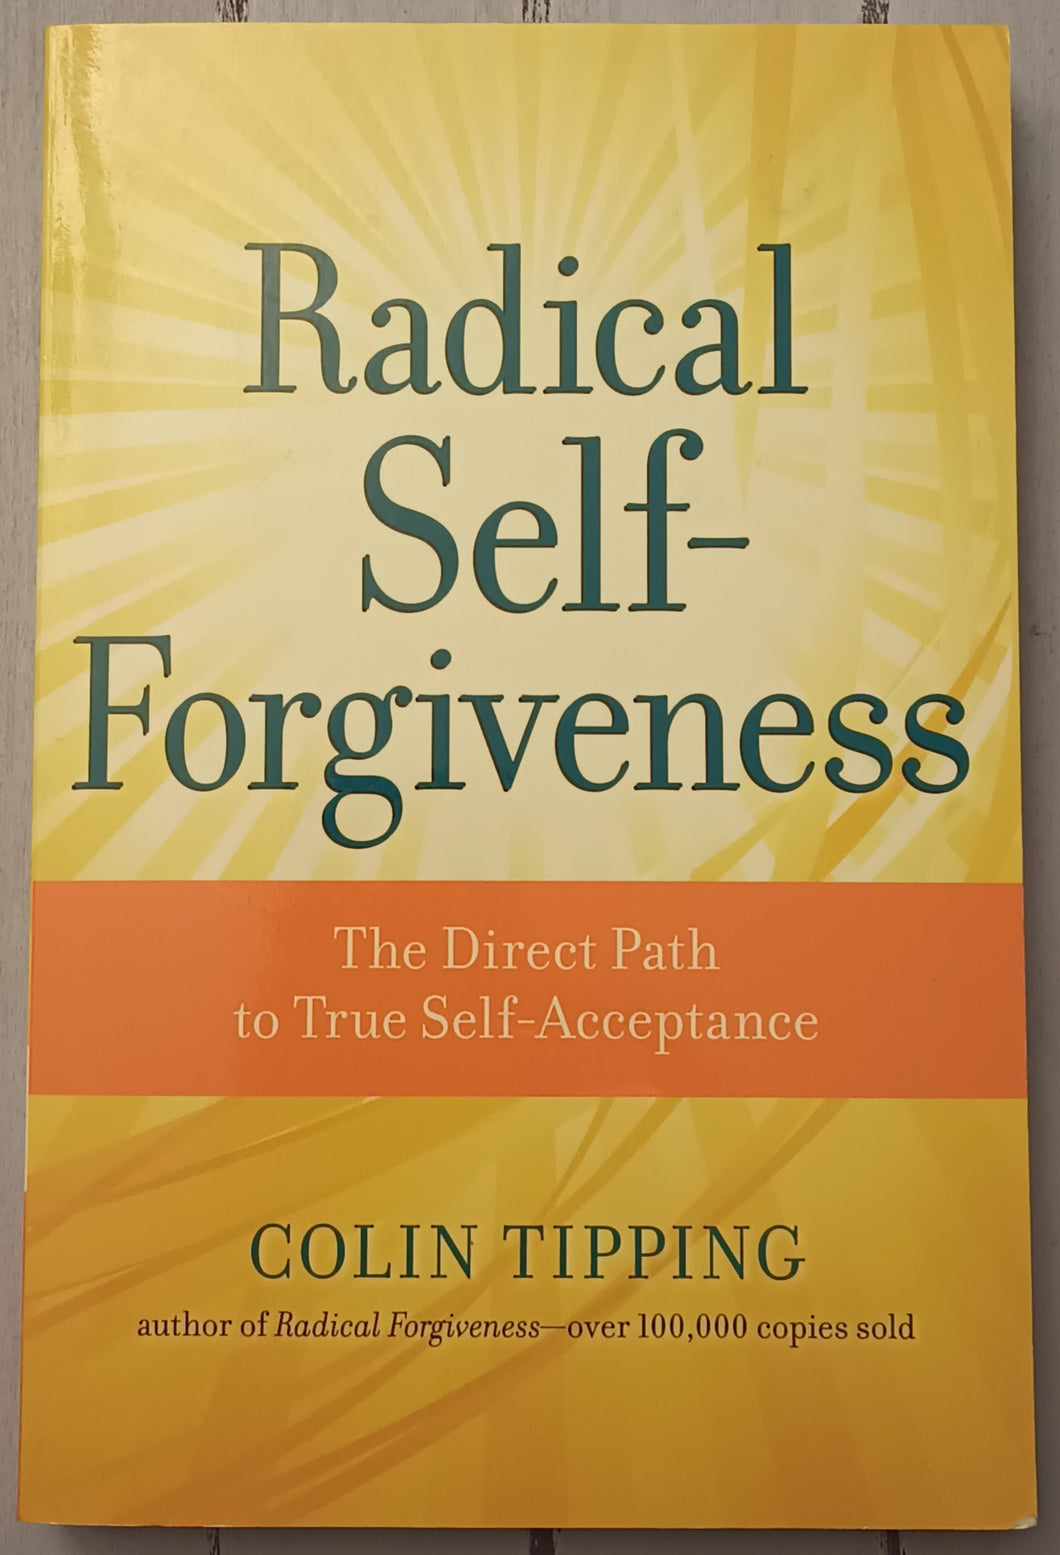 Radical Self-Forgiveness: The Direct Path to True Self-Acceptance